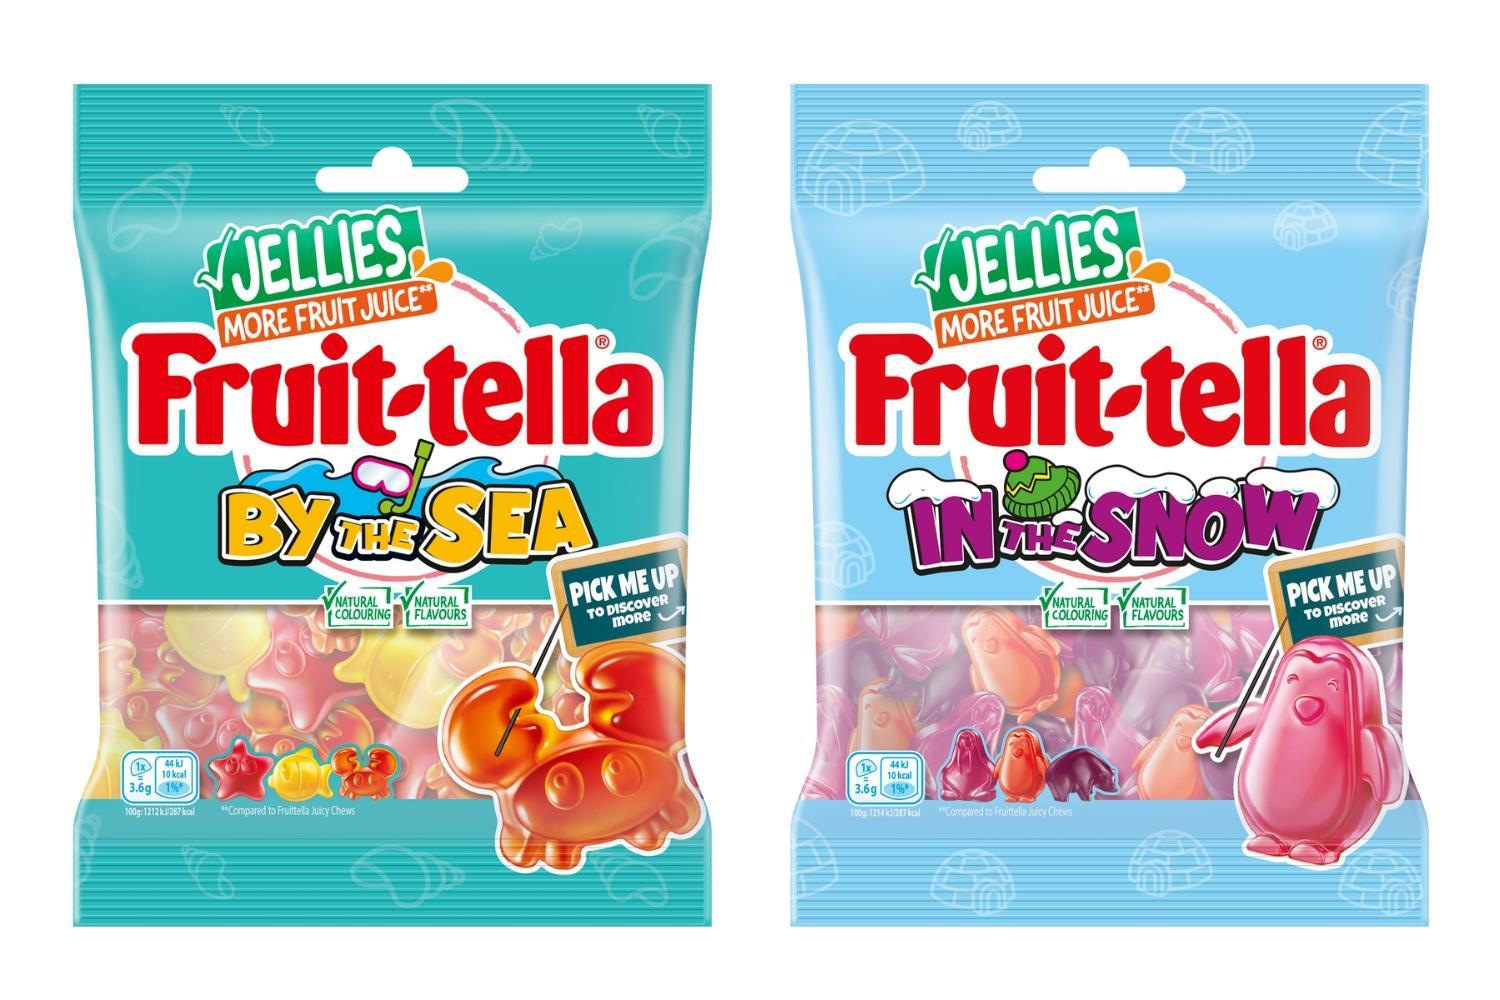 Fruittella expands confectionery range with HFSS-compliant jellies, News